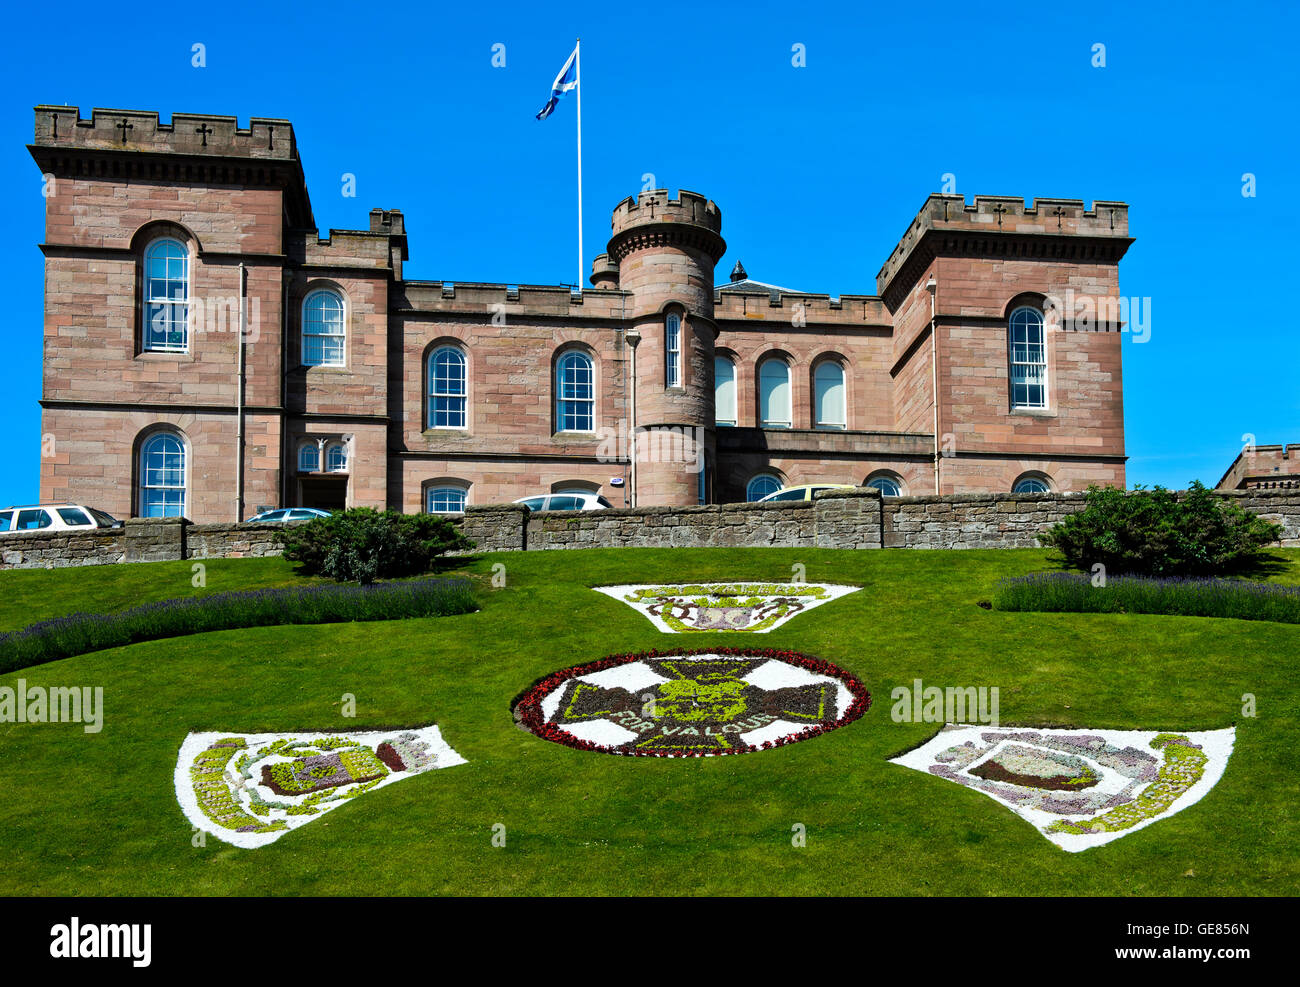 Inverness Castle with the Victoria Cross war medal as floral clock, Inverness, Scotland, Great Britain Stock Photo